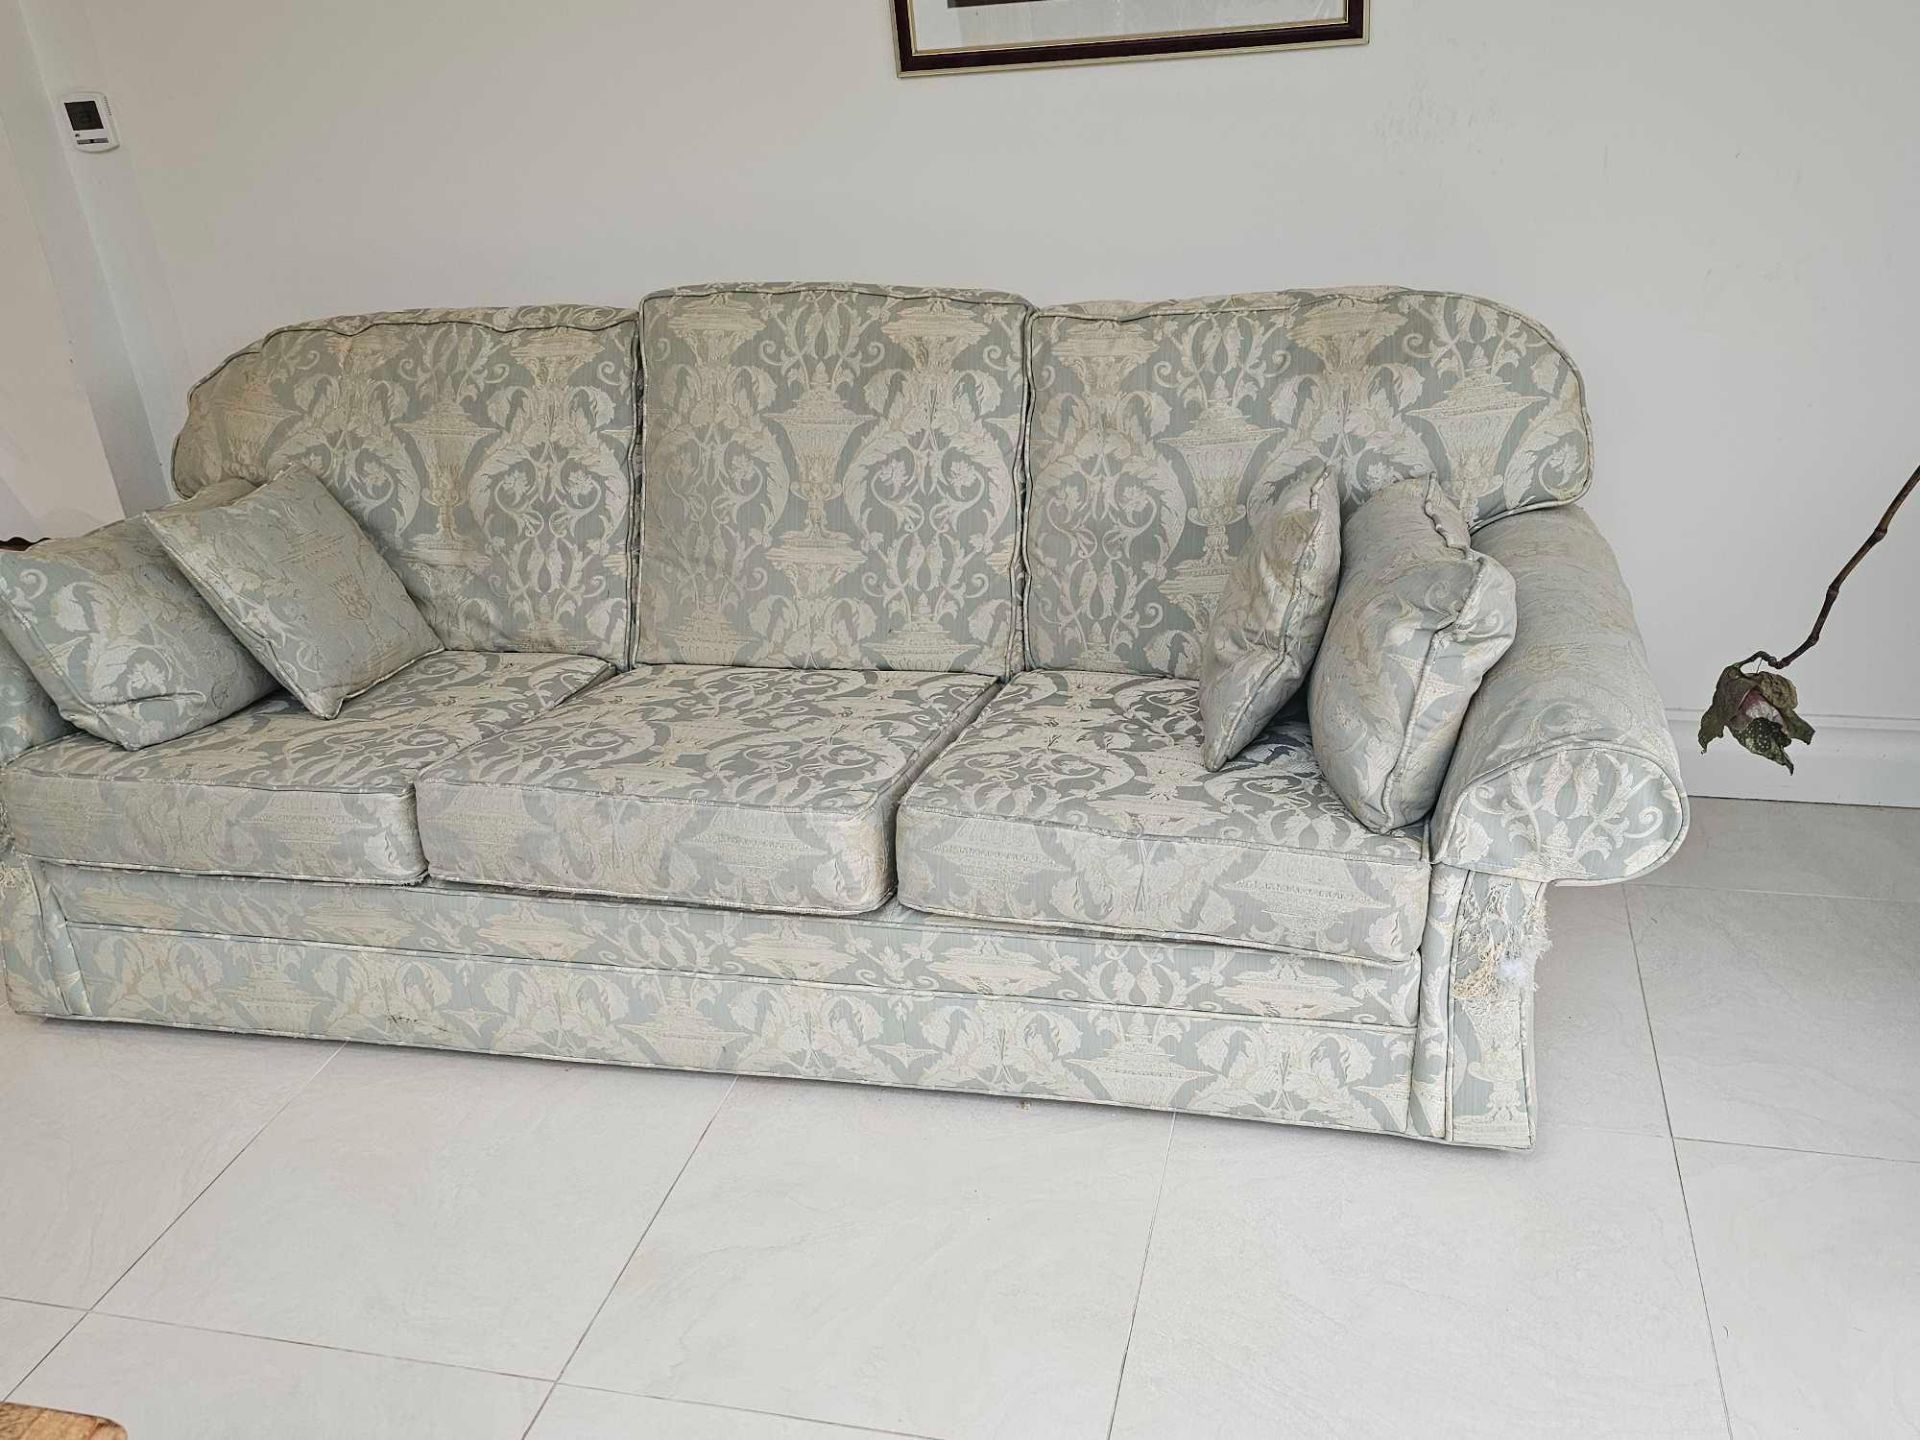 A Peter Guild Upholstered Three Seater Sofa In Damask Embossed Pattern Mint And Gold 235 X 87 X 95cm - Image 2 of 7